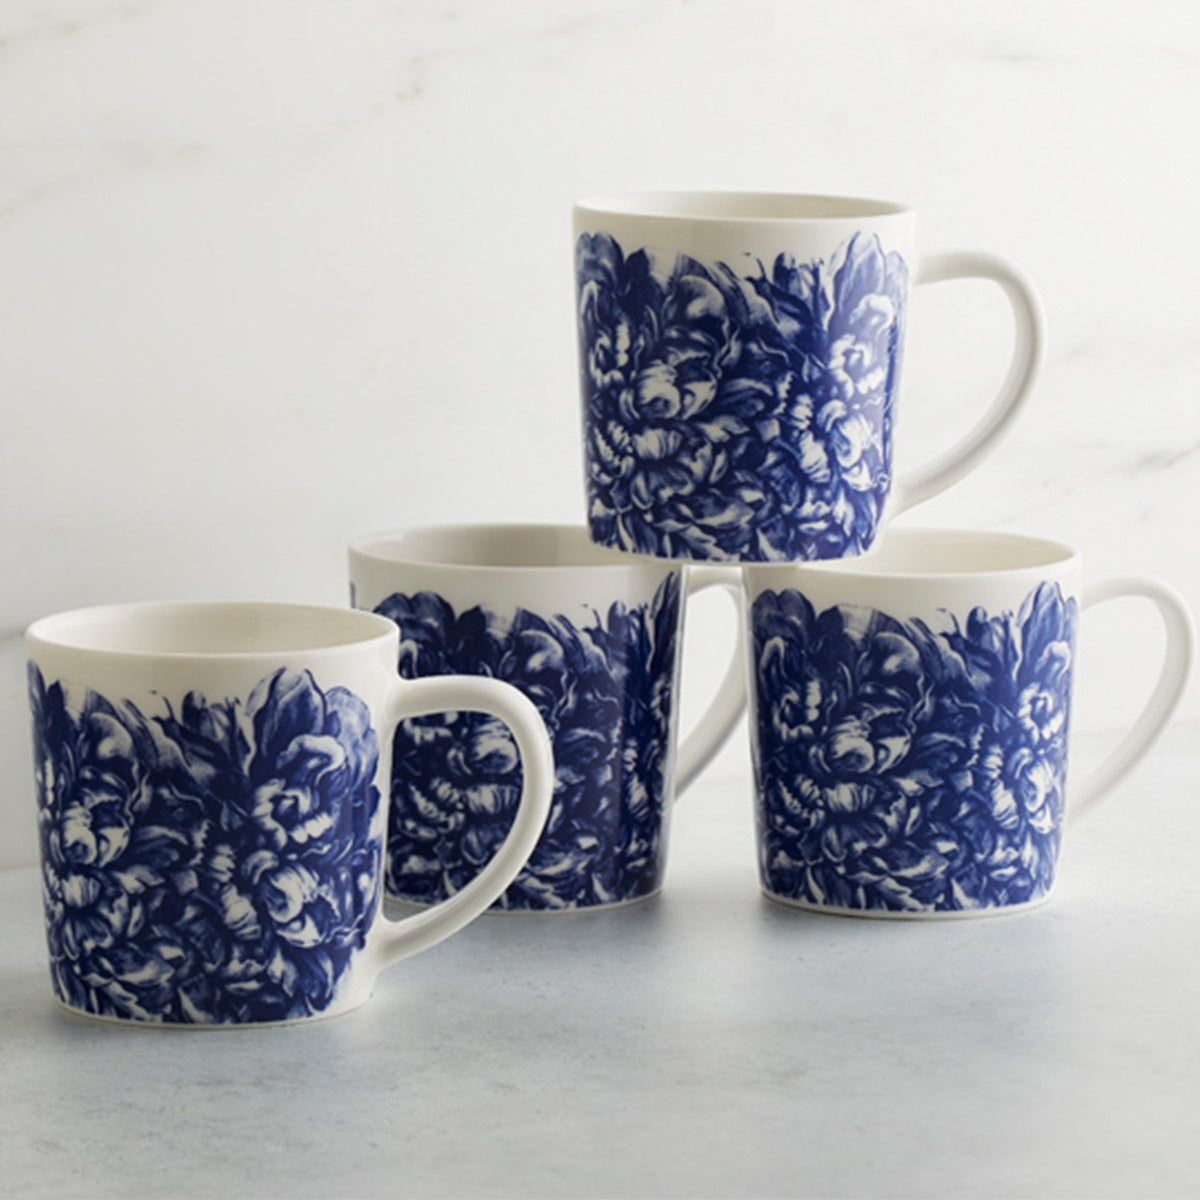 Four white Caskata Artisanal Home Peony Mugs with blue floral patterns stacked in two columns against a marble background.